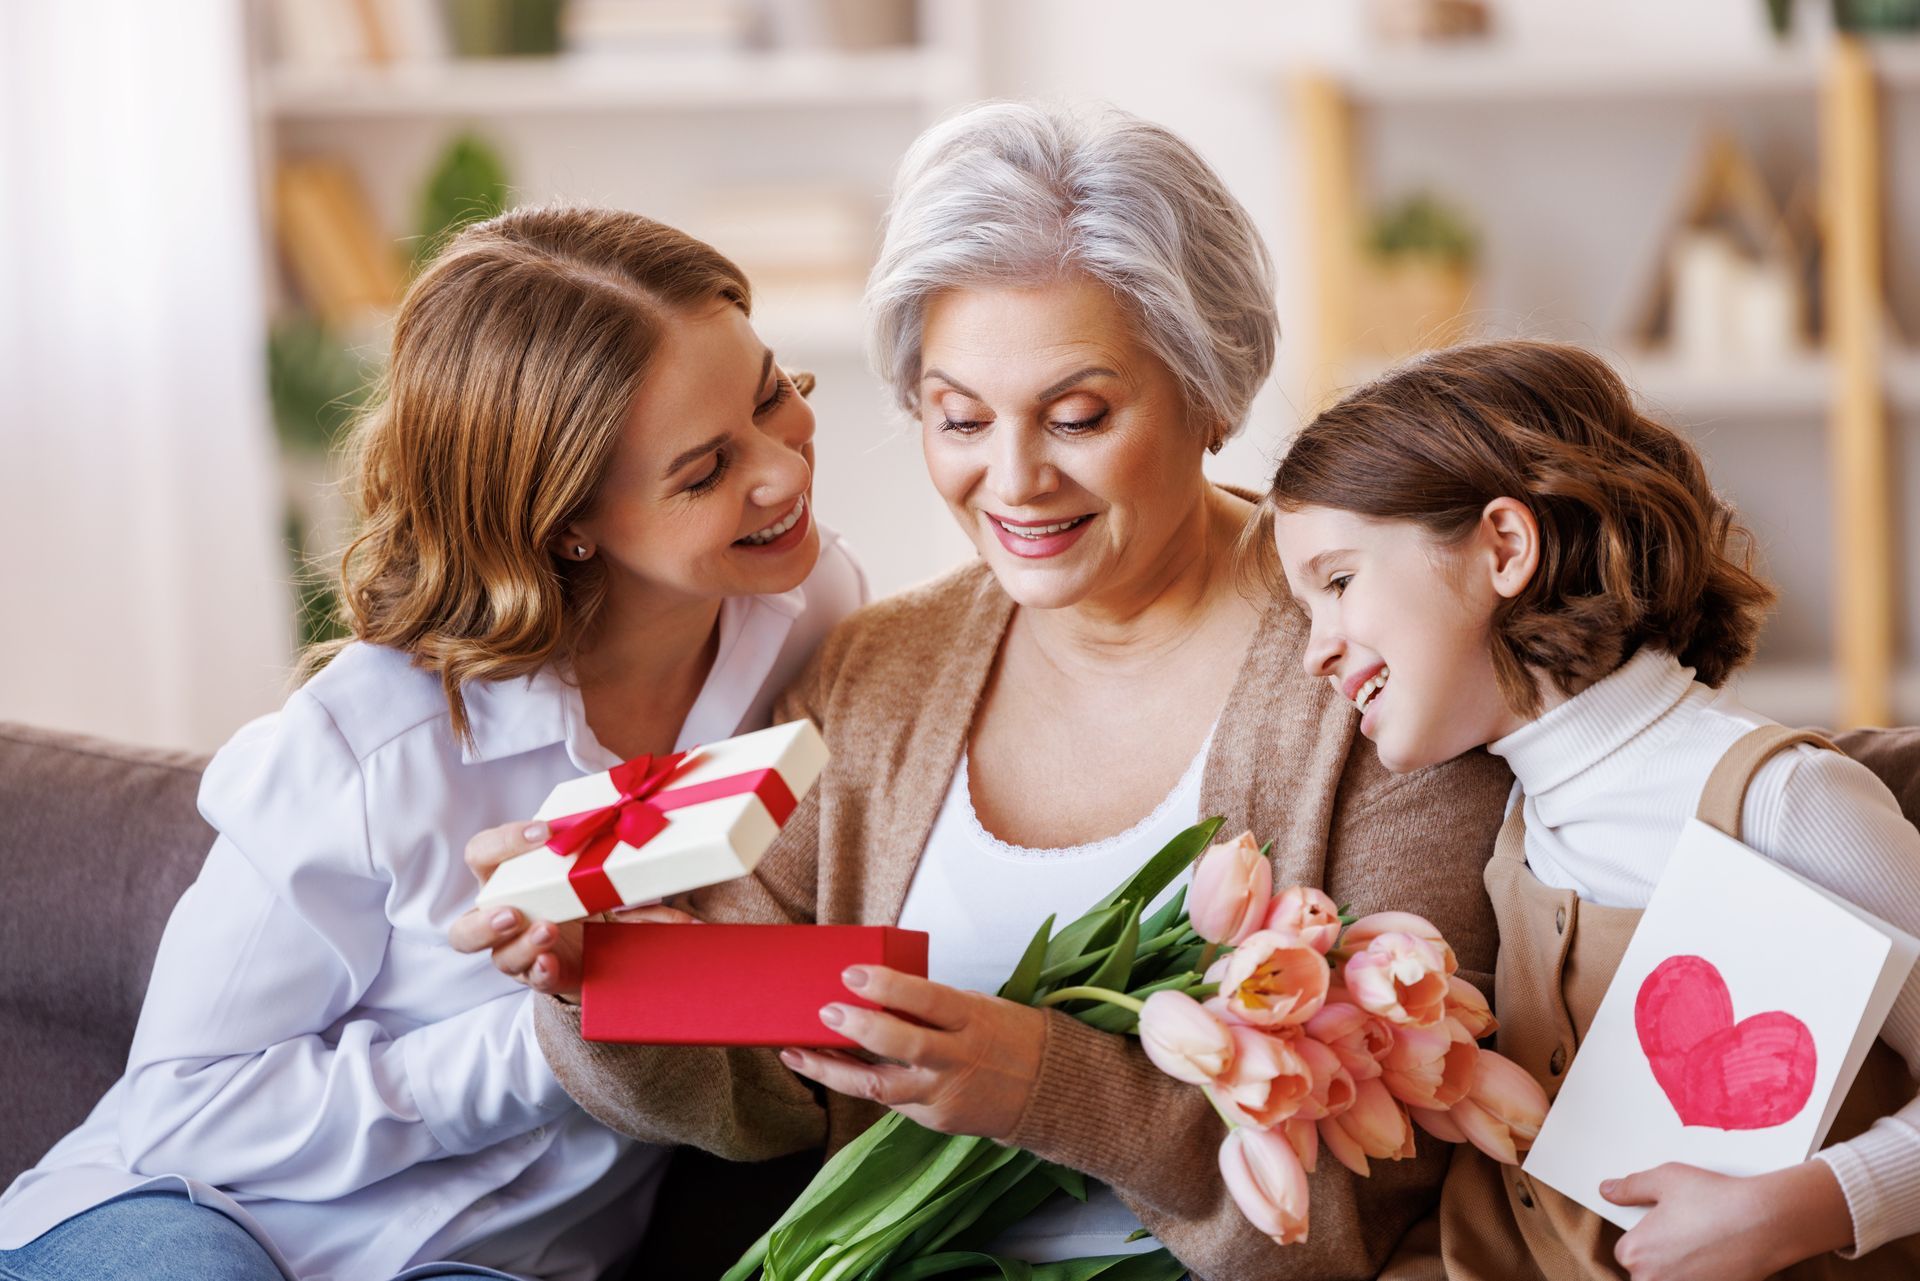 Women giving gifts to her mom